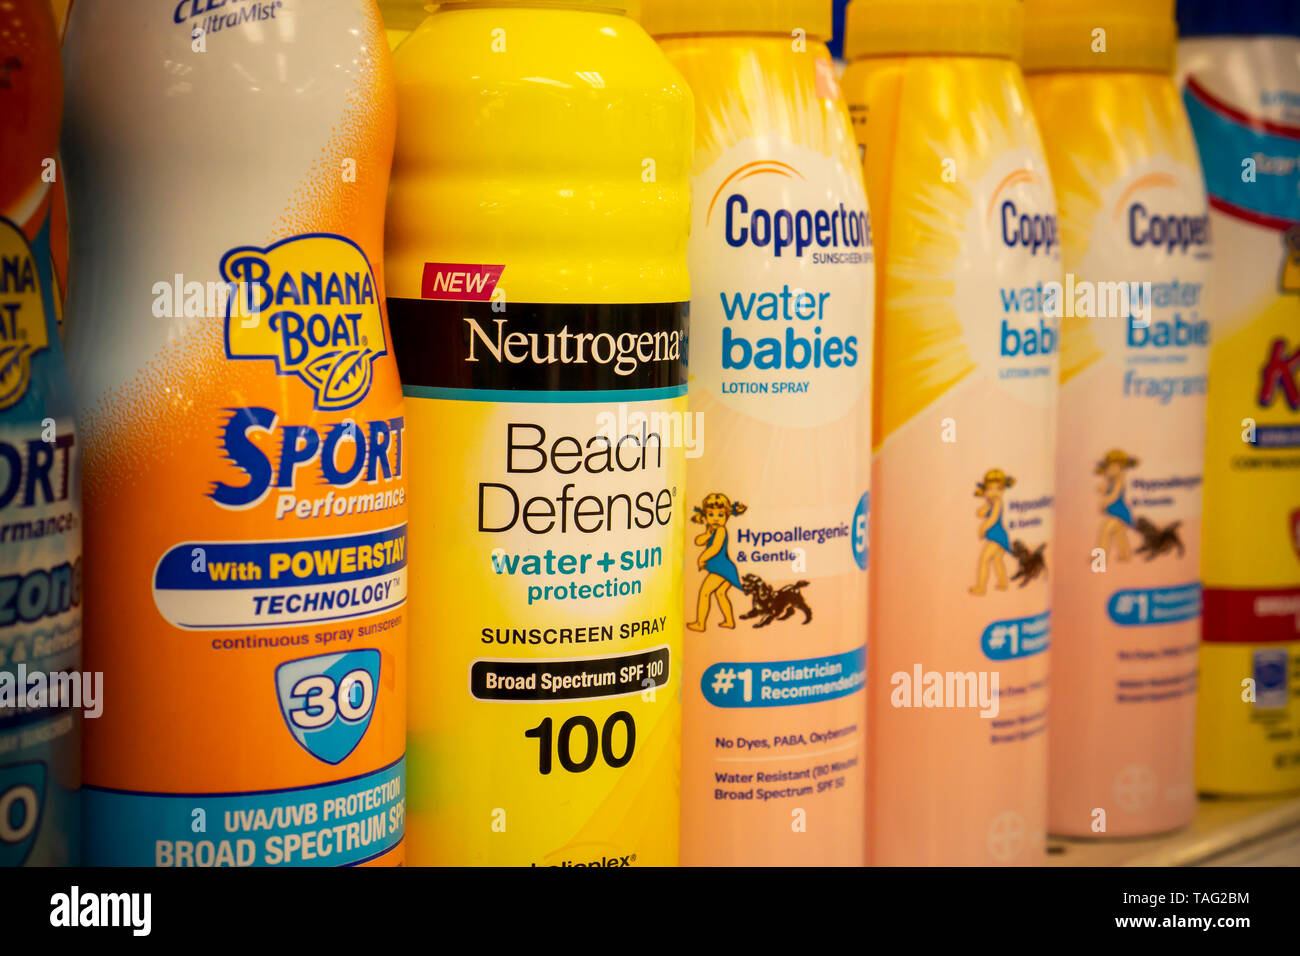 Bottles of sunscreen are seen on a department store shelf in New York on Saturday, May 18, 2019. The unofficial beginning of summer arrives on the Memorial Day weekend at the end of May. (Â© Richard B. Levine) Stock Photo